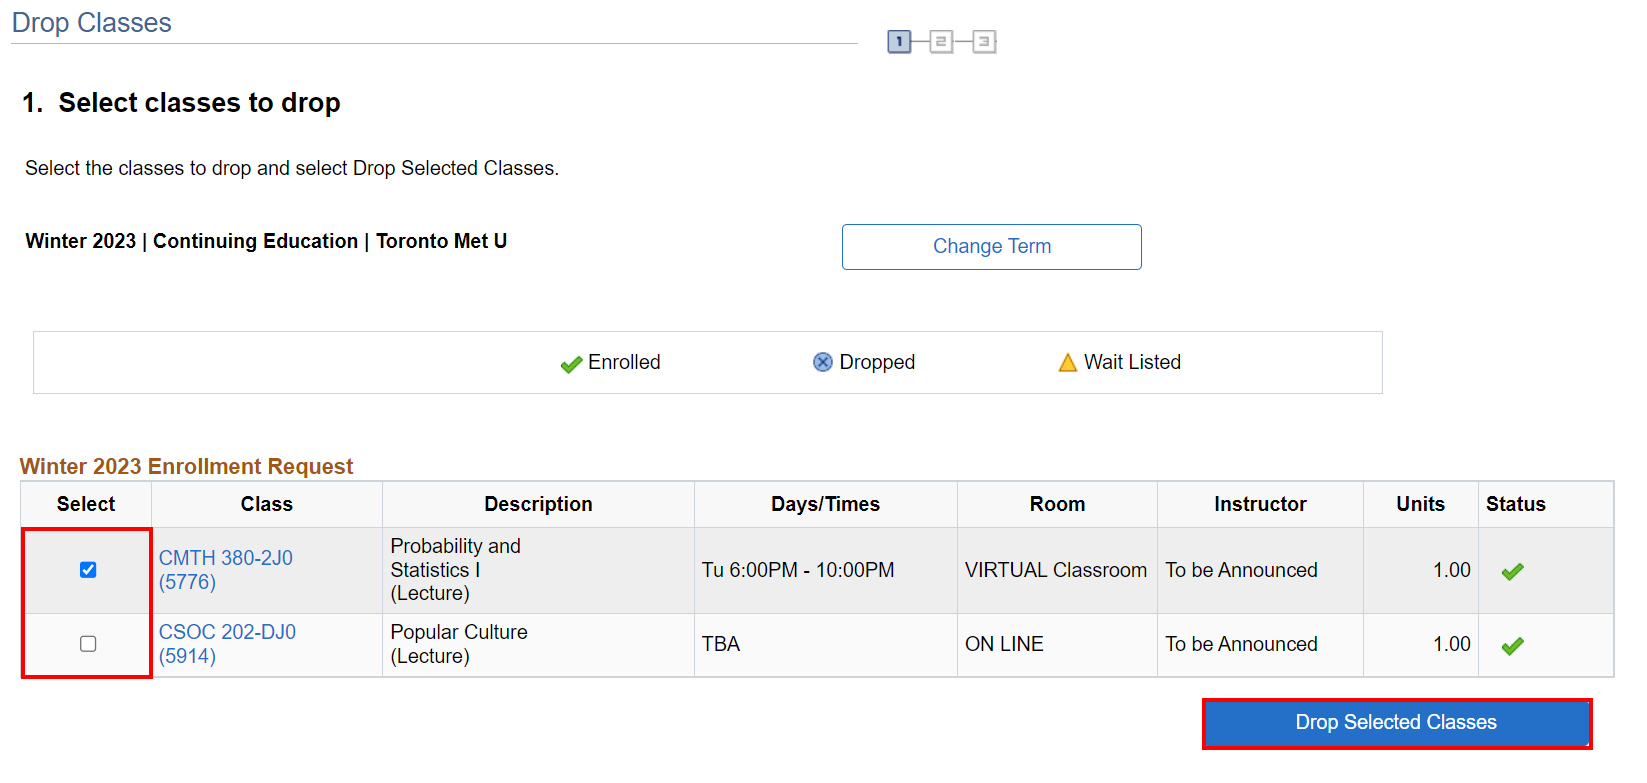 Checklist of classes to drop in Winter term and the 'Drop Selected Classes' button highlighted